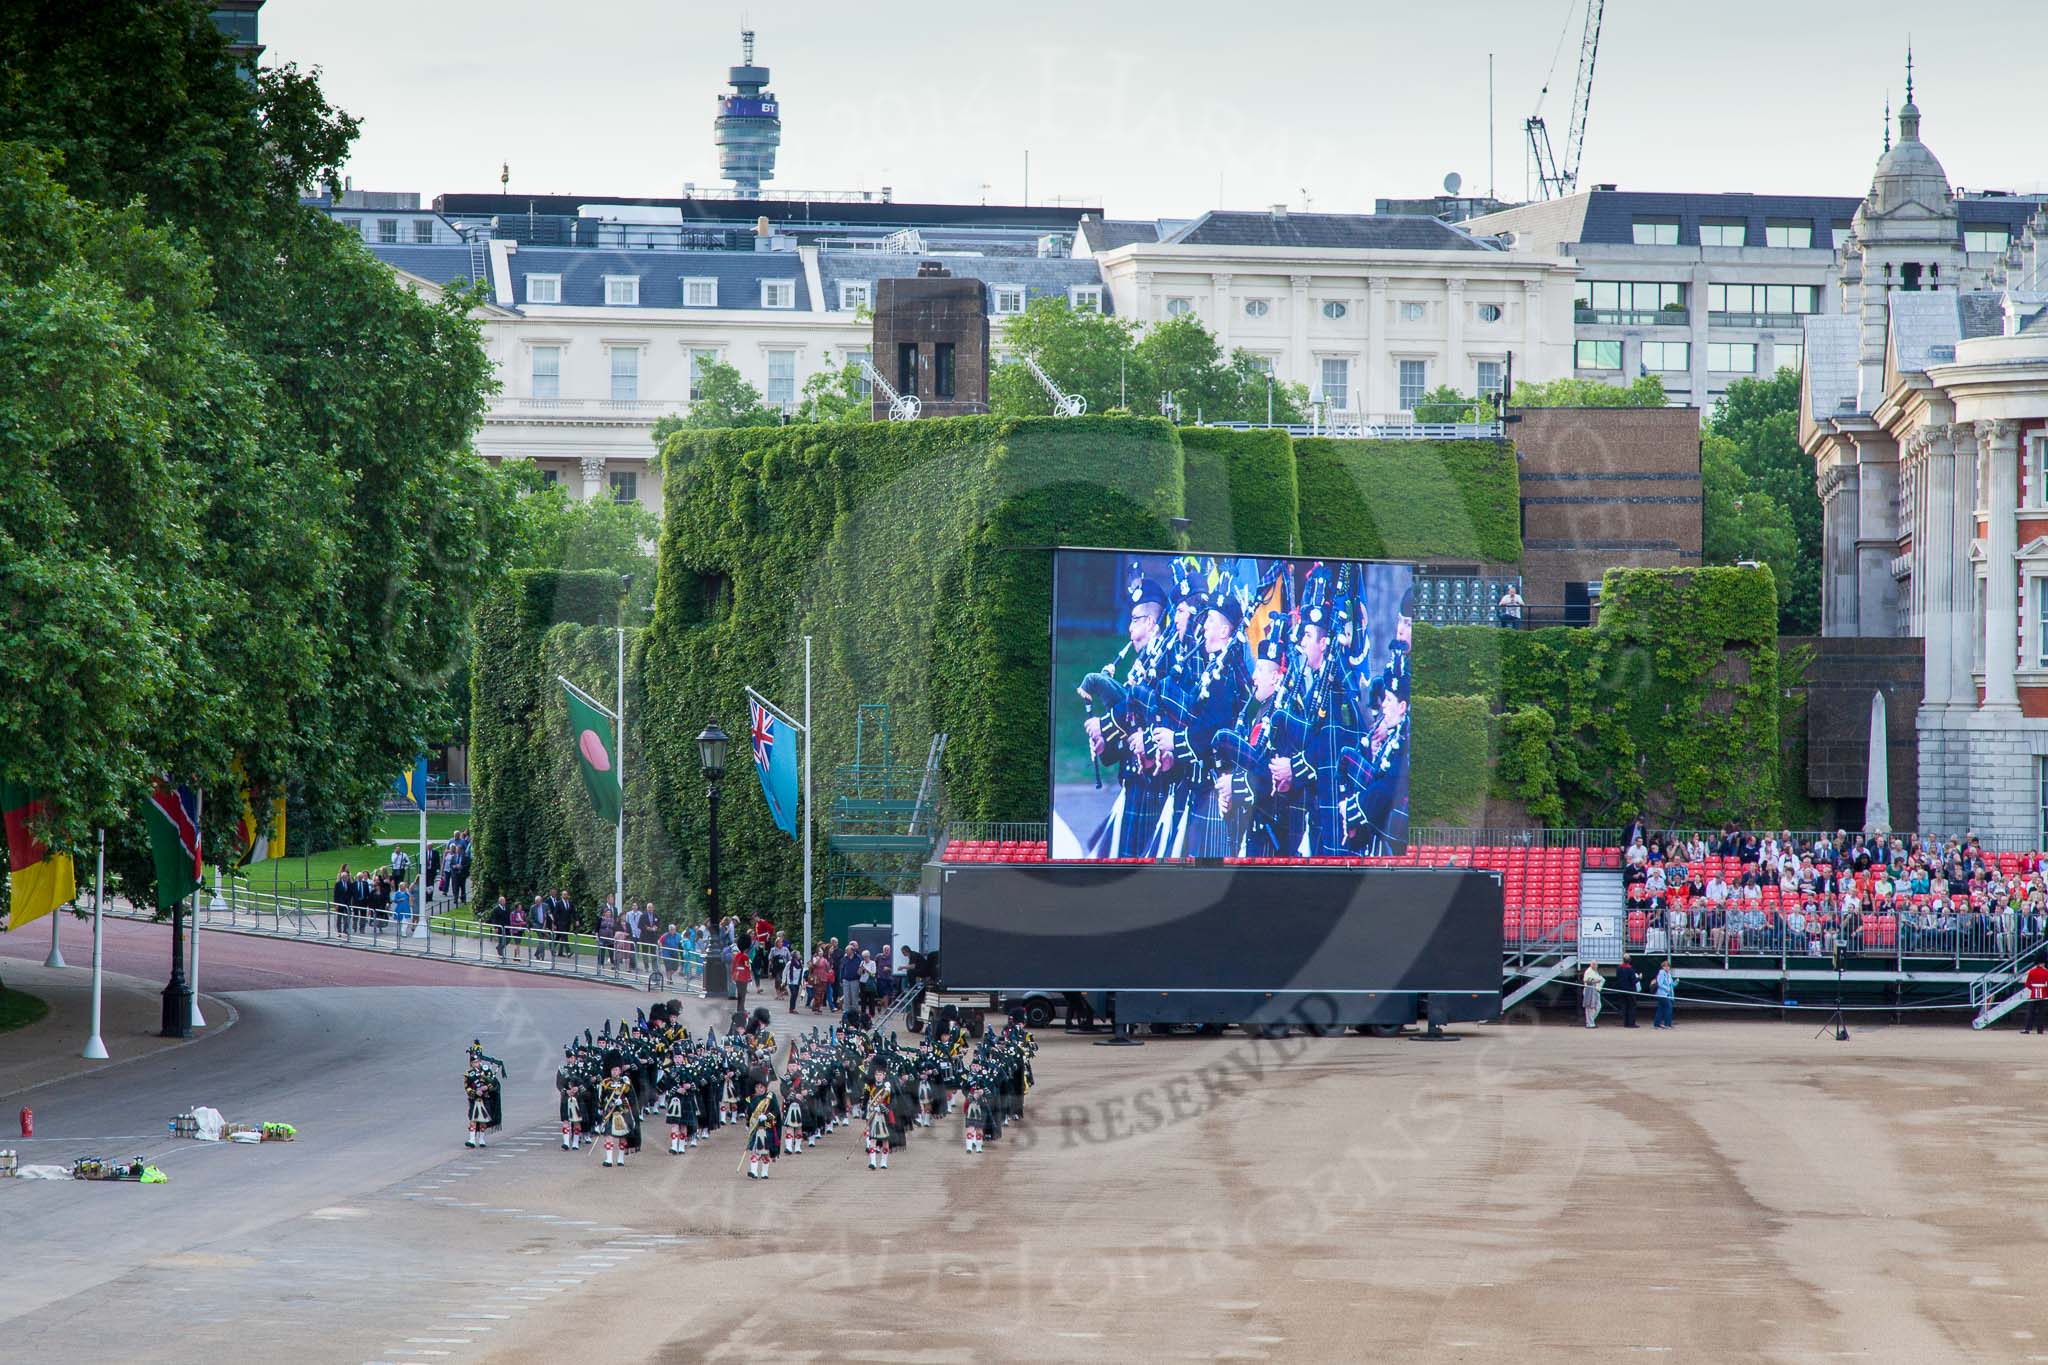 Beating Retreat 2014.
Horse Guards Parade, Westminster,
London SW1A,

United Kingdom,
on 11 June 2014 at 19:51, image #12